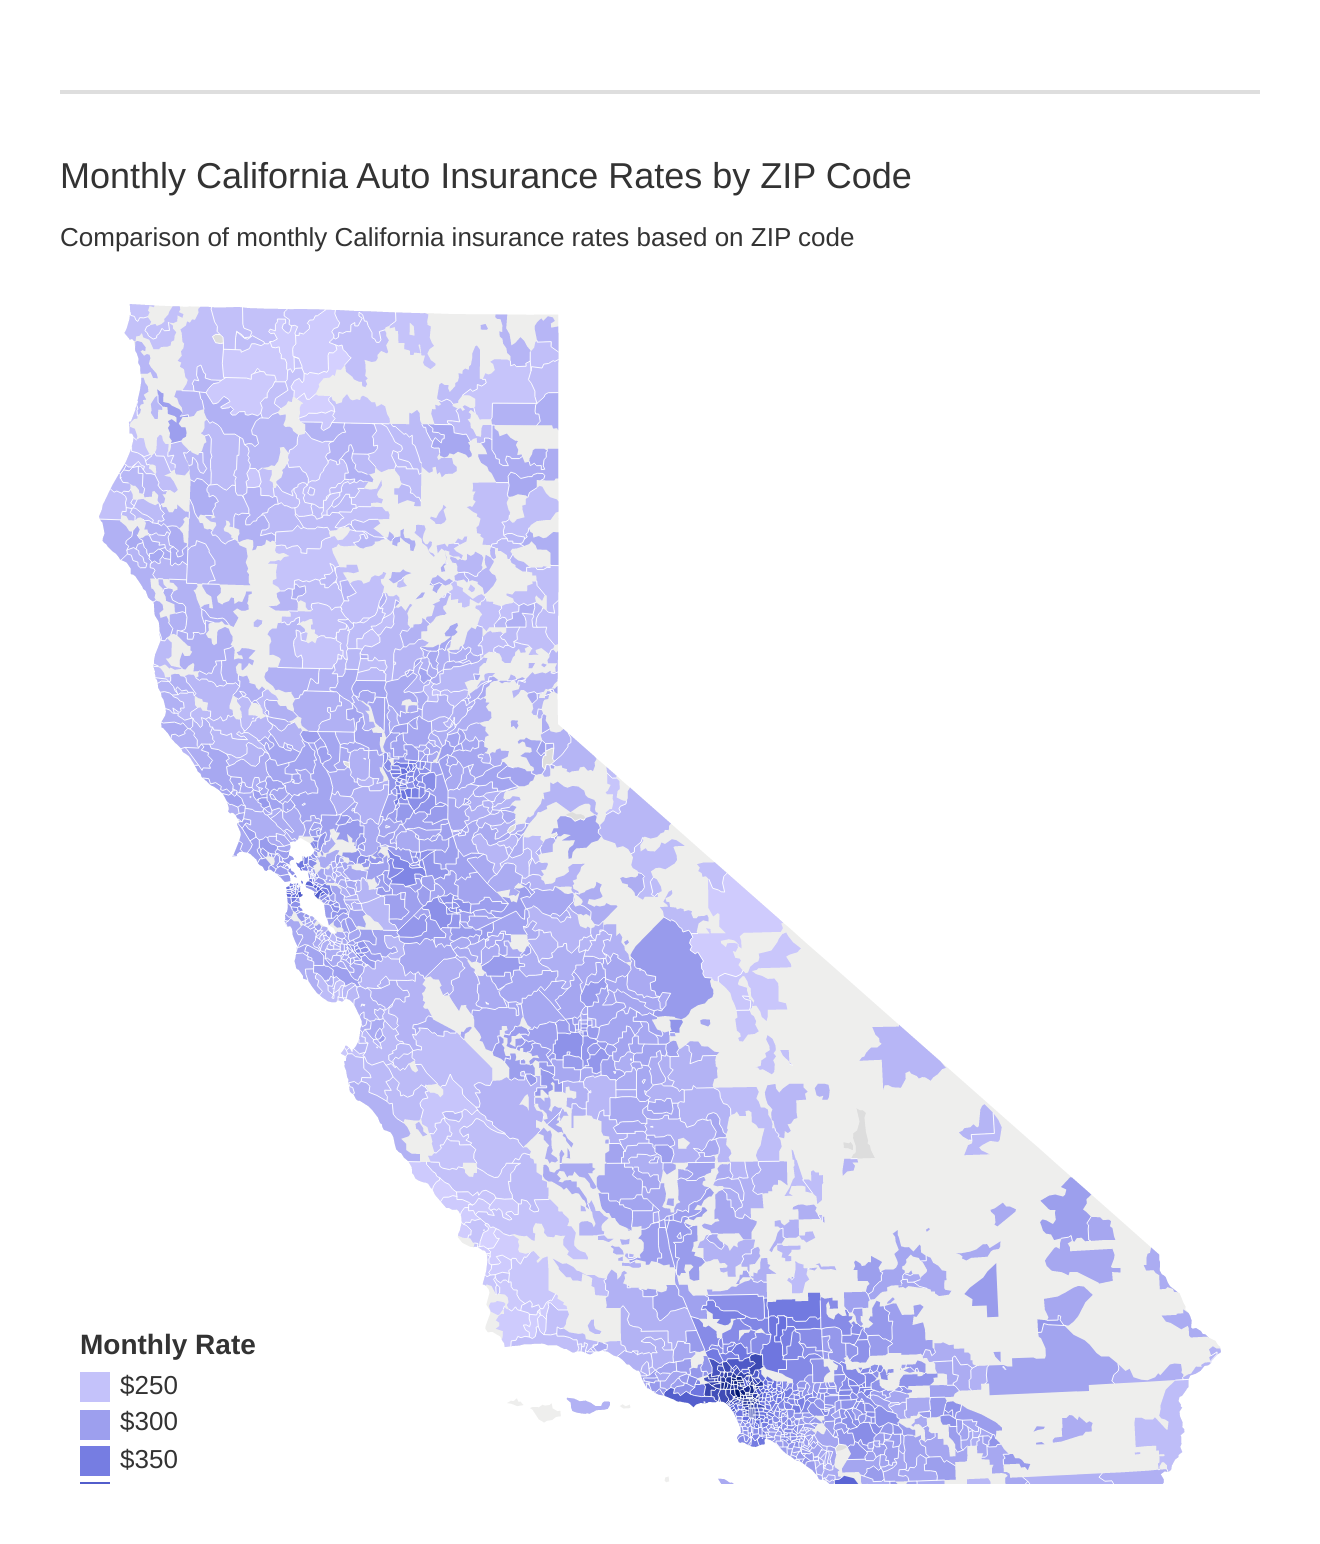 Monthly California Auto Insurance Rates by ZIP Code